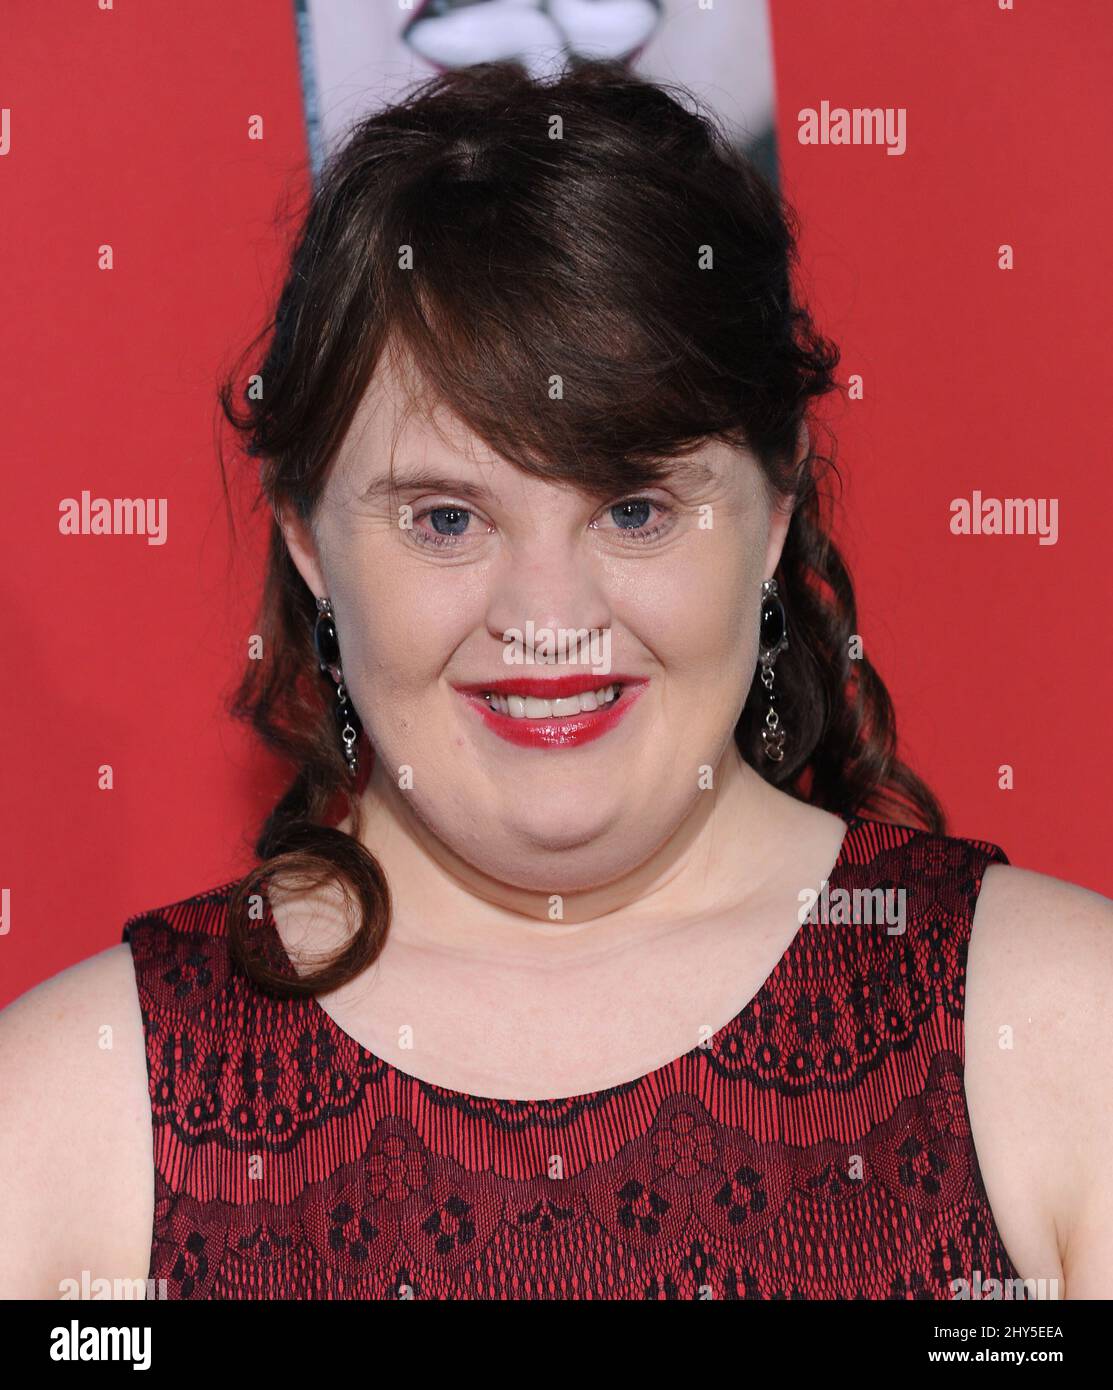 Jamie Brewer Attends The American Horror Story Freak Show Season Premiere At The Chinese Theatre Stock Photo Alamy